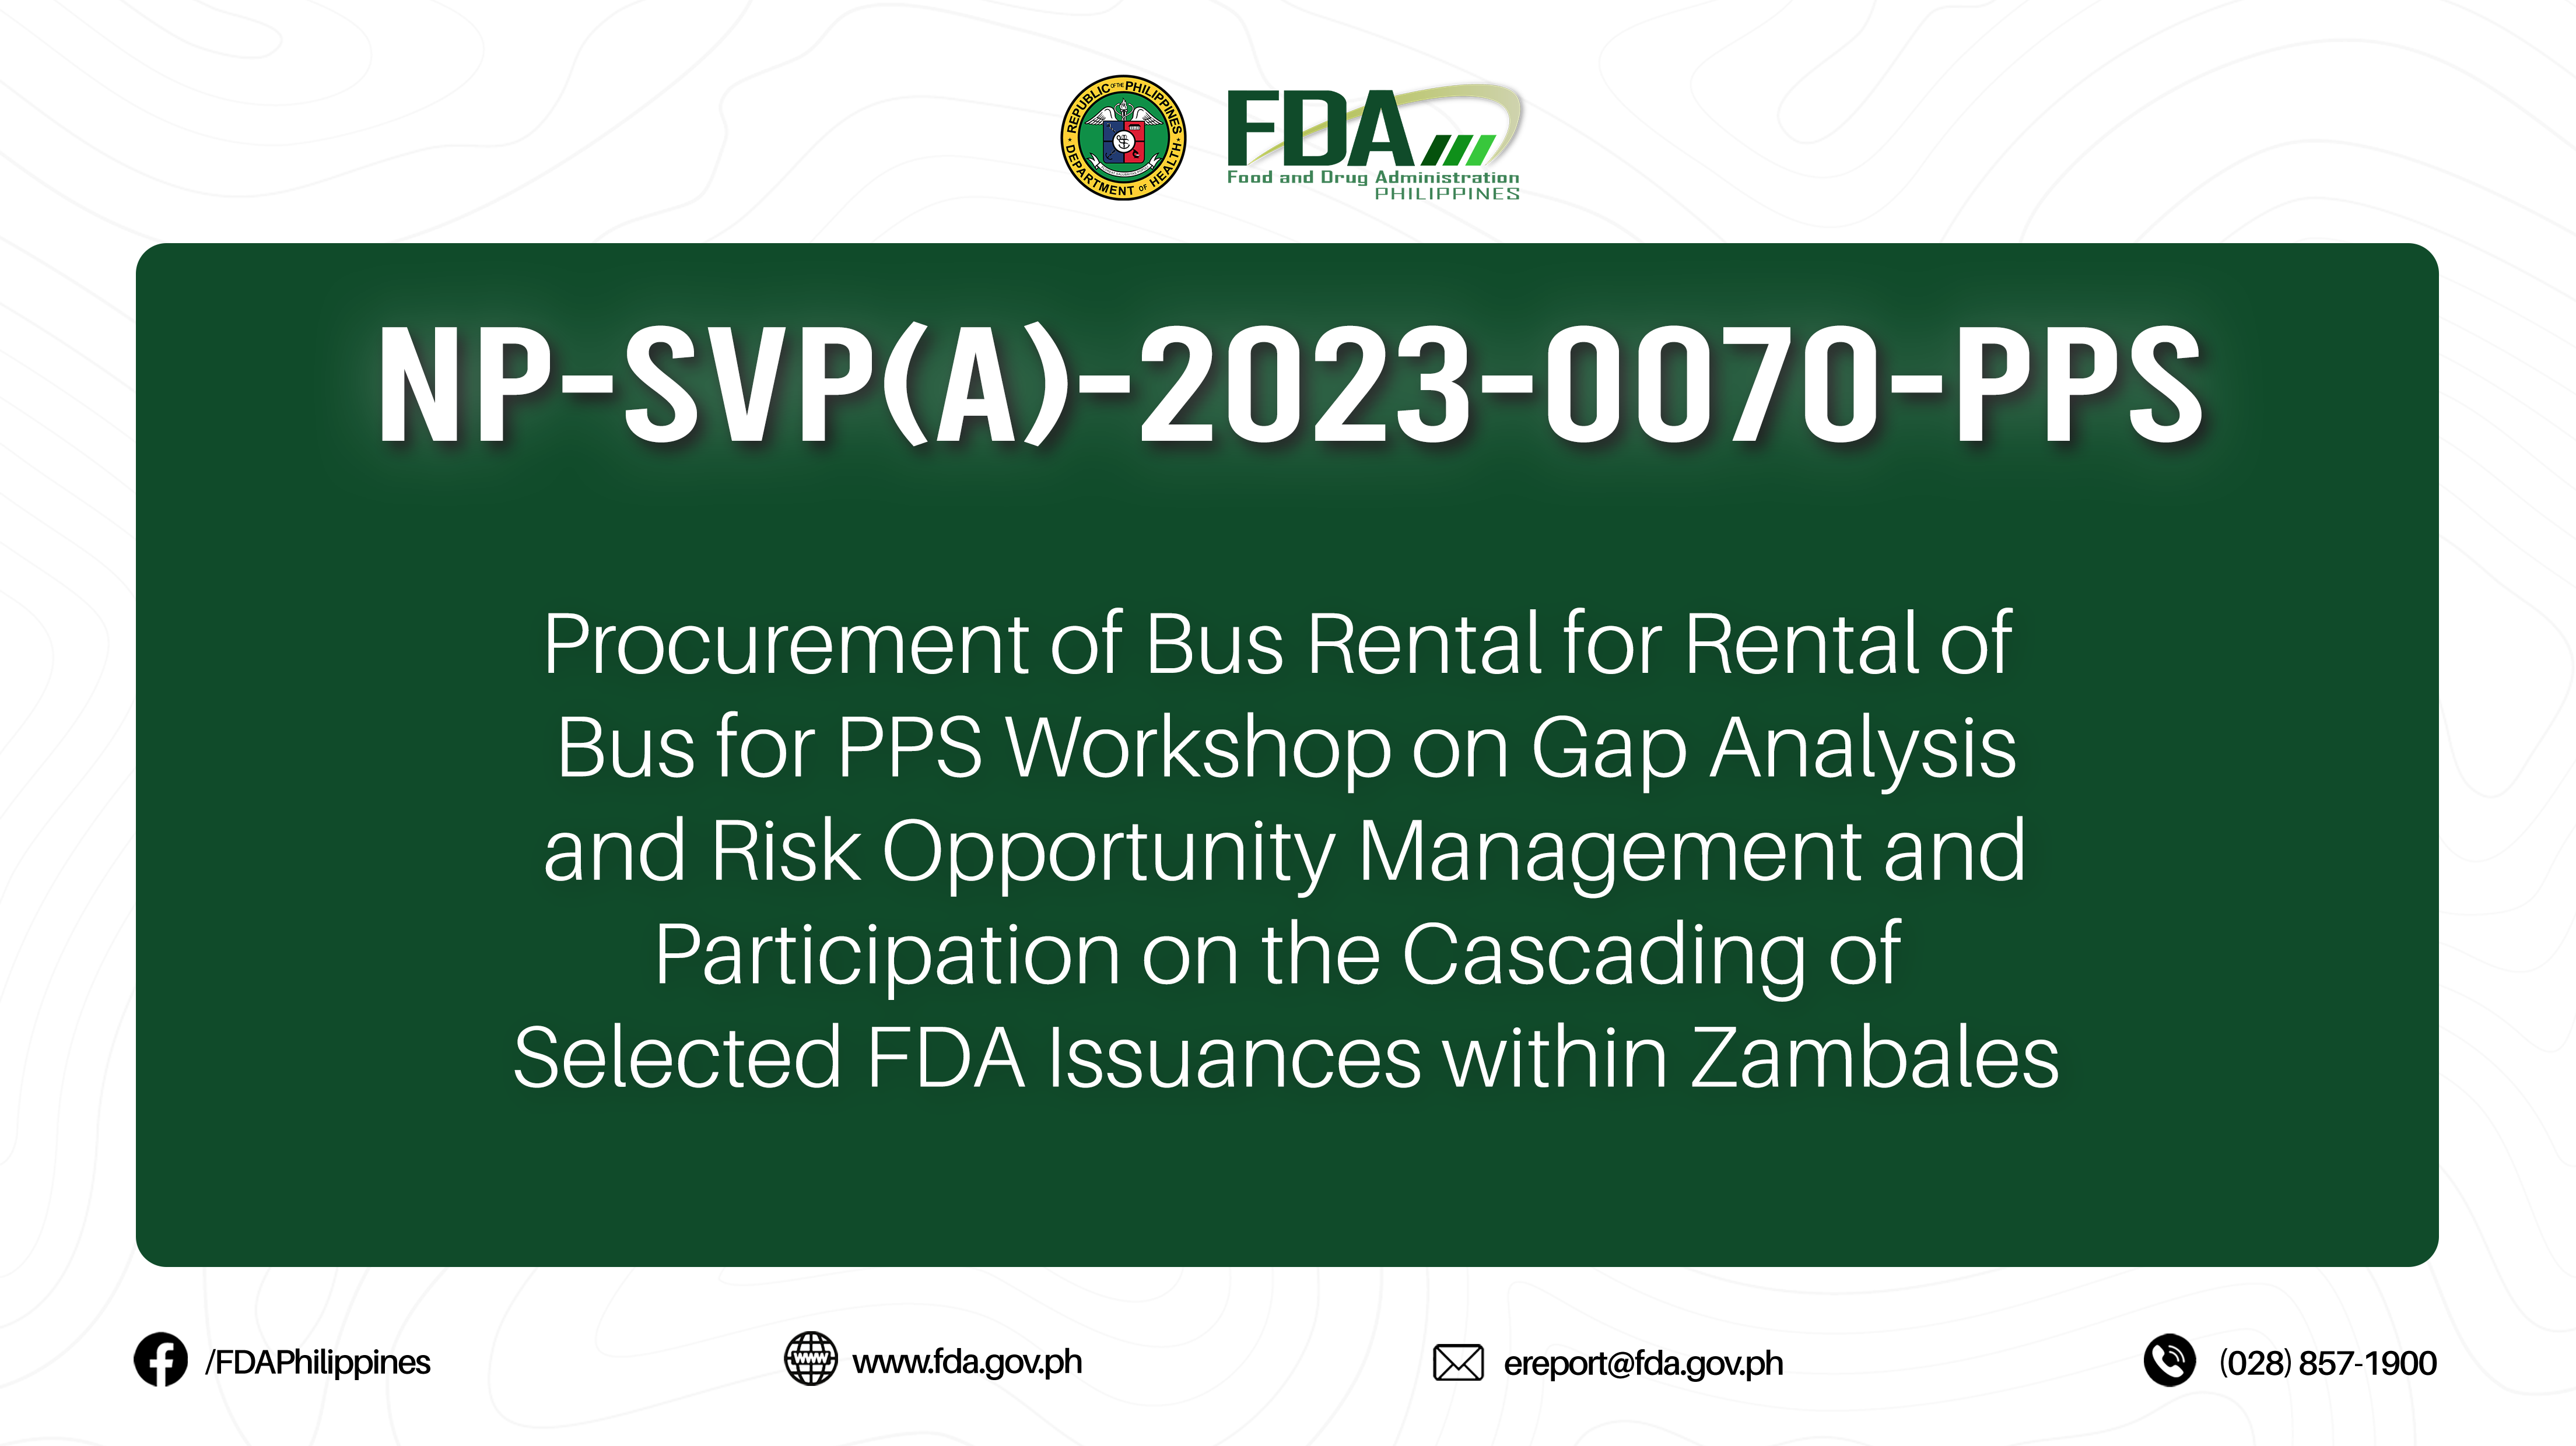 NP-SVP(A)-2023-0070-PPS || Procurement of Bus Rental for Rental of Bus for PPS Workshop on Gap Analysis and Risk Opportunity Management and Participation on the Cascading of Selected FDA Issuances within Zambales